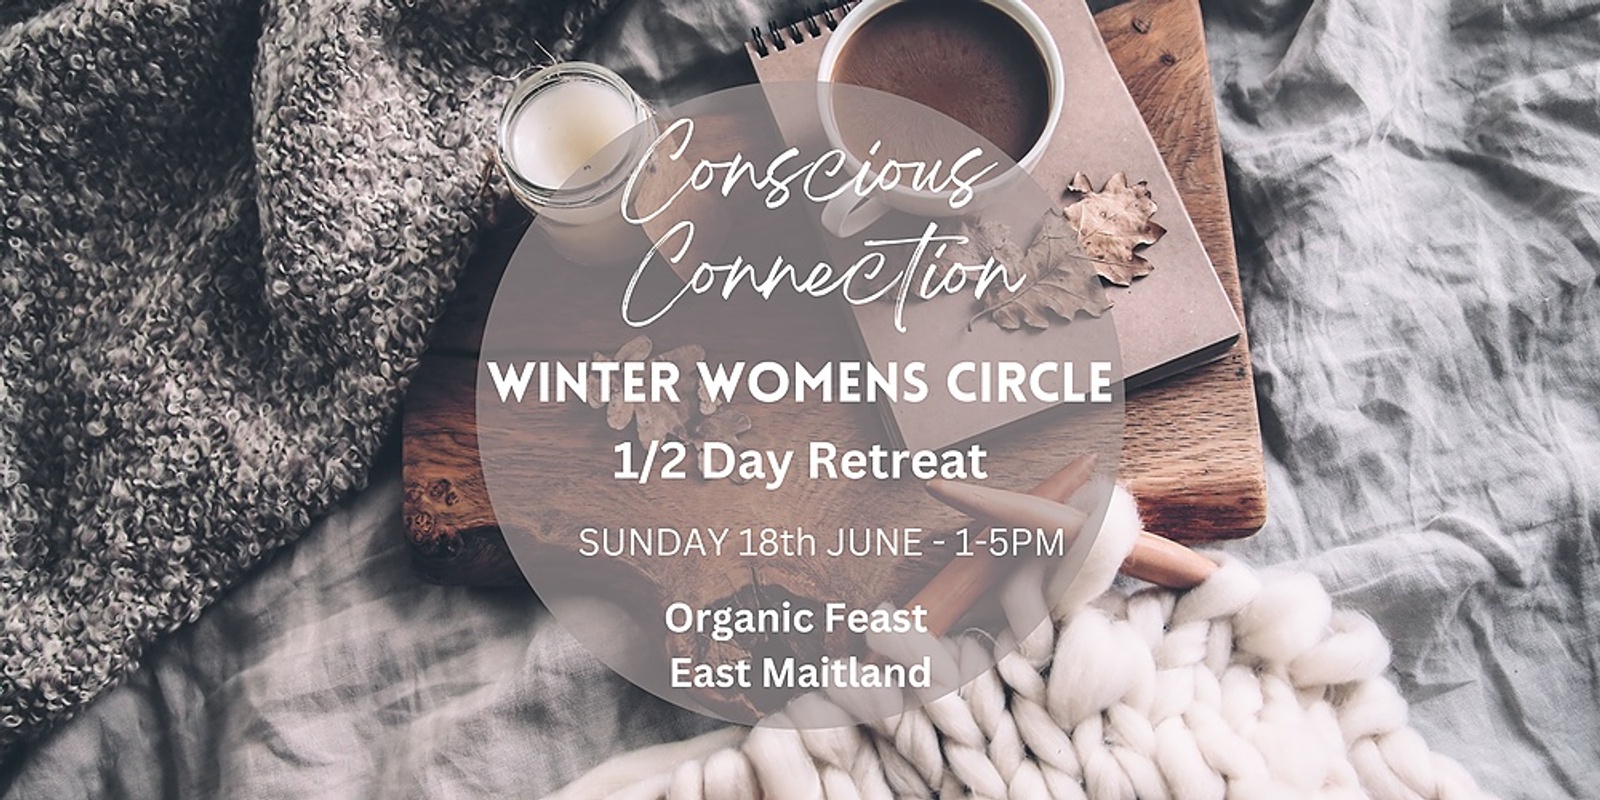 Banner image for Conscious Connection Winter Women's Circle - 1/2 Day Retreat